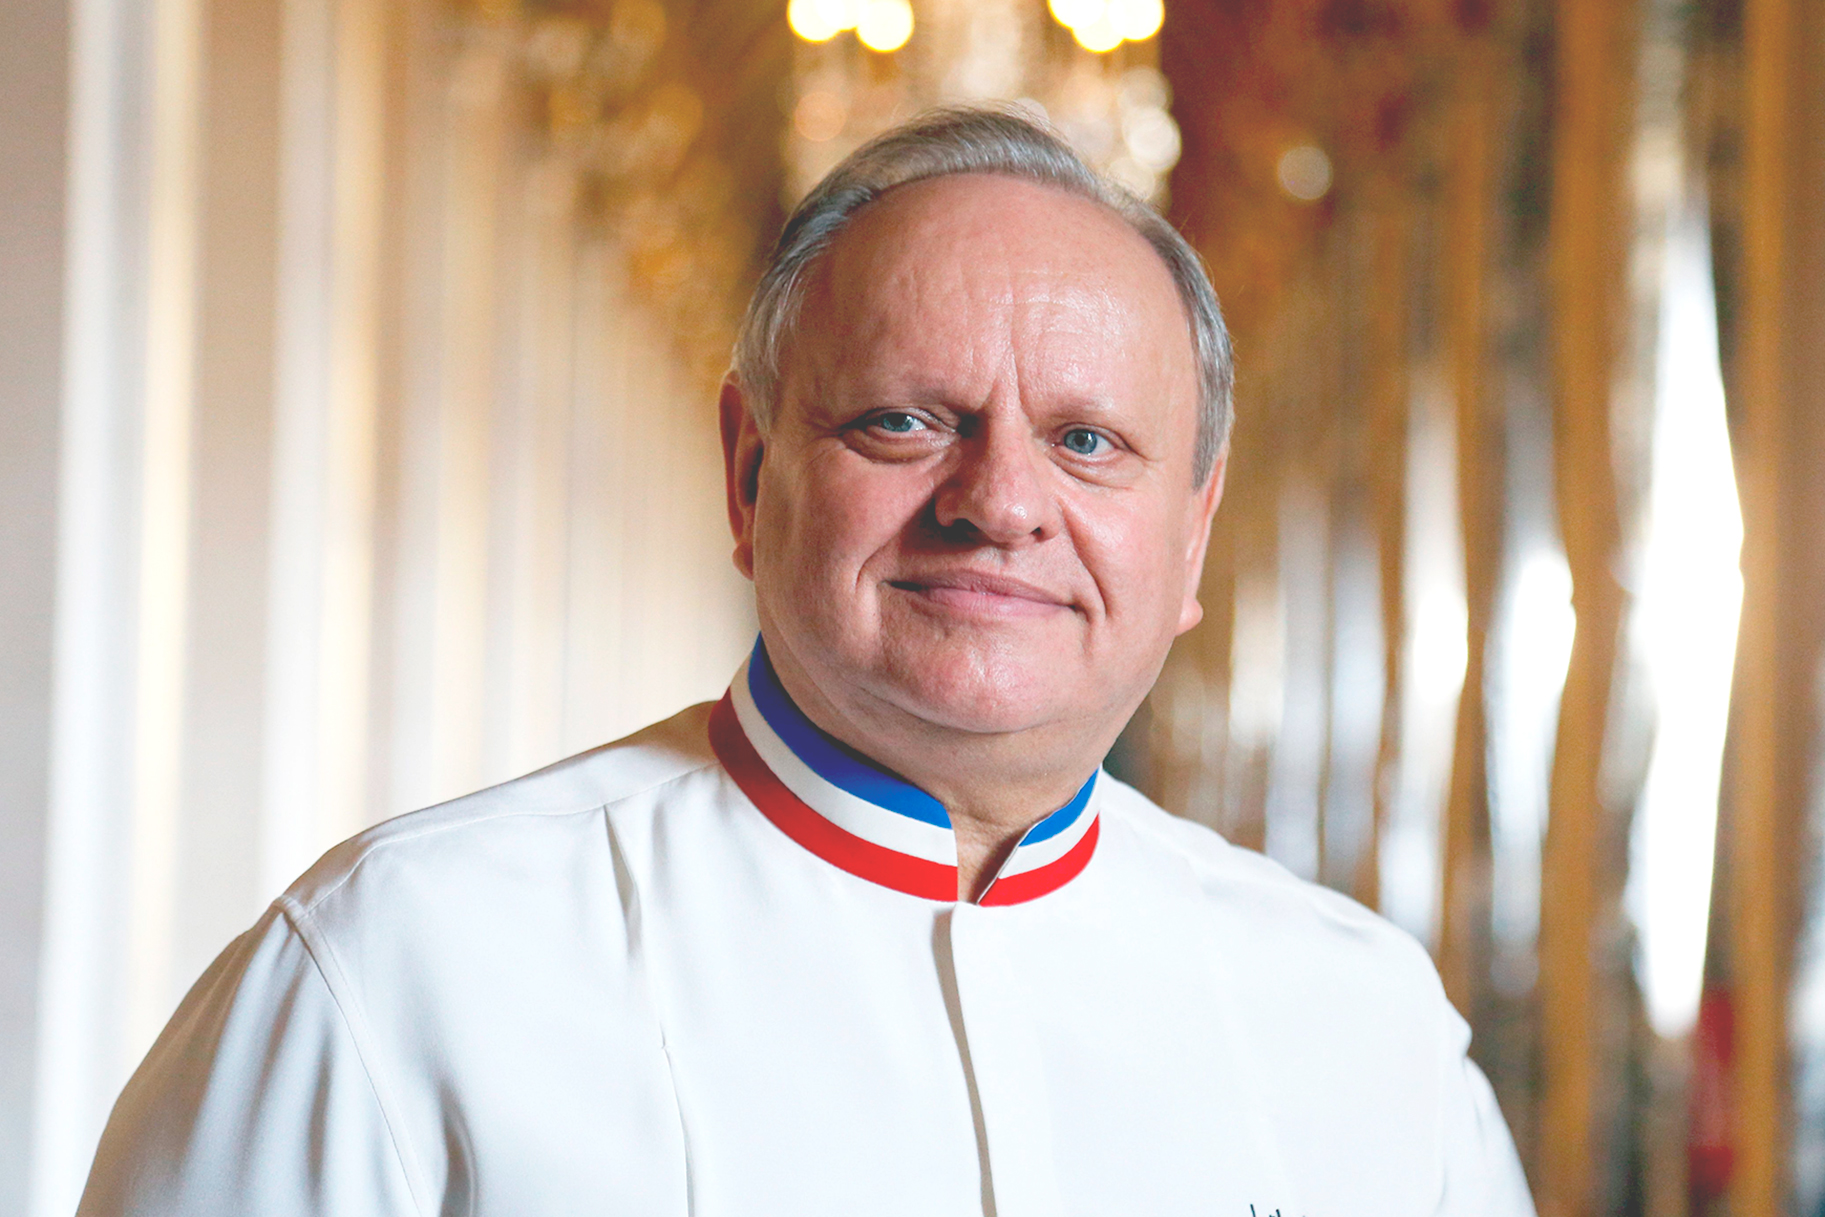 French chef Joel Robuchon in his chef outfit